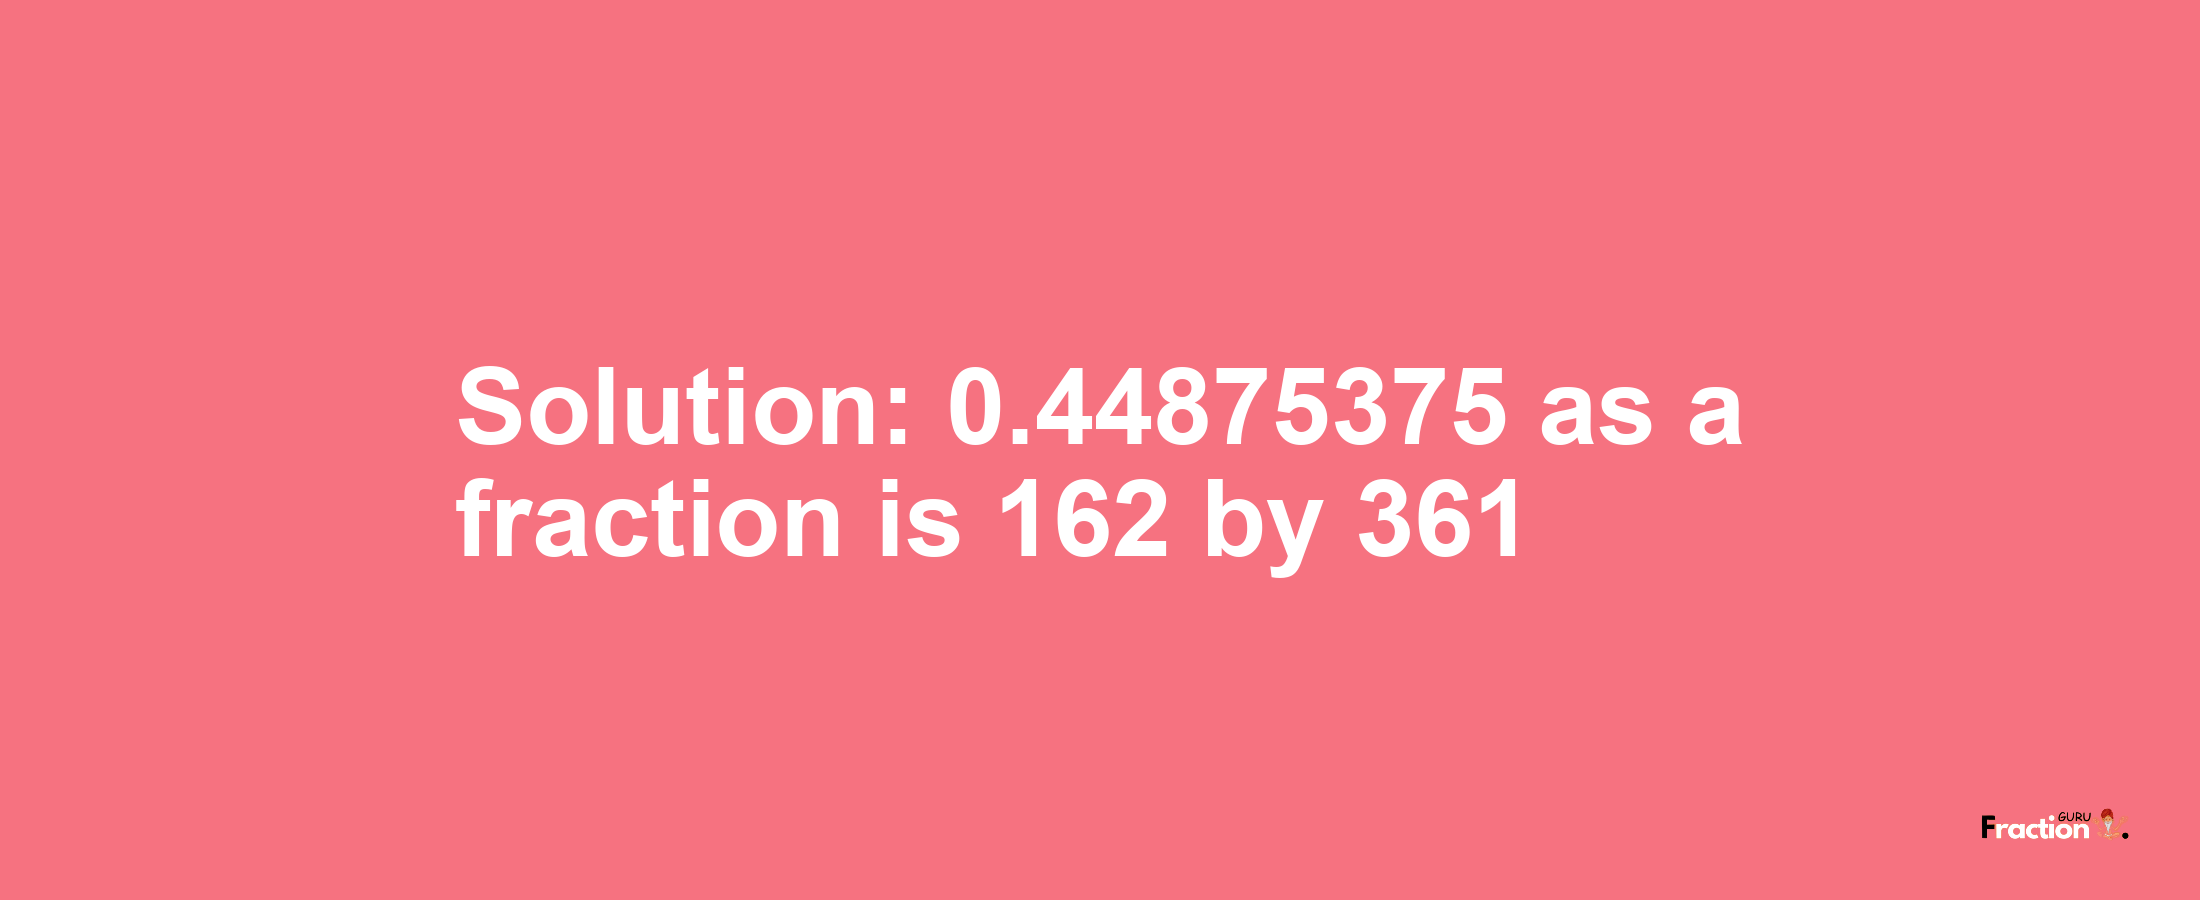 Solution:0.44875375 as a fraction is 162/361